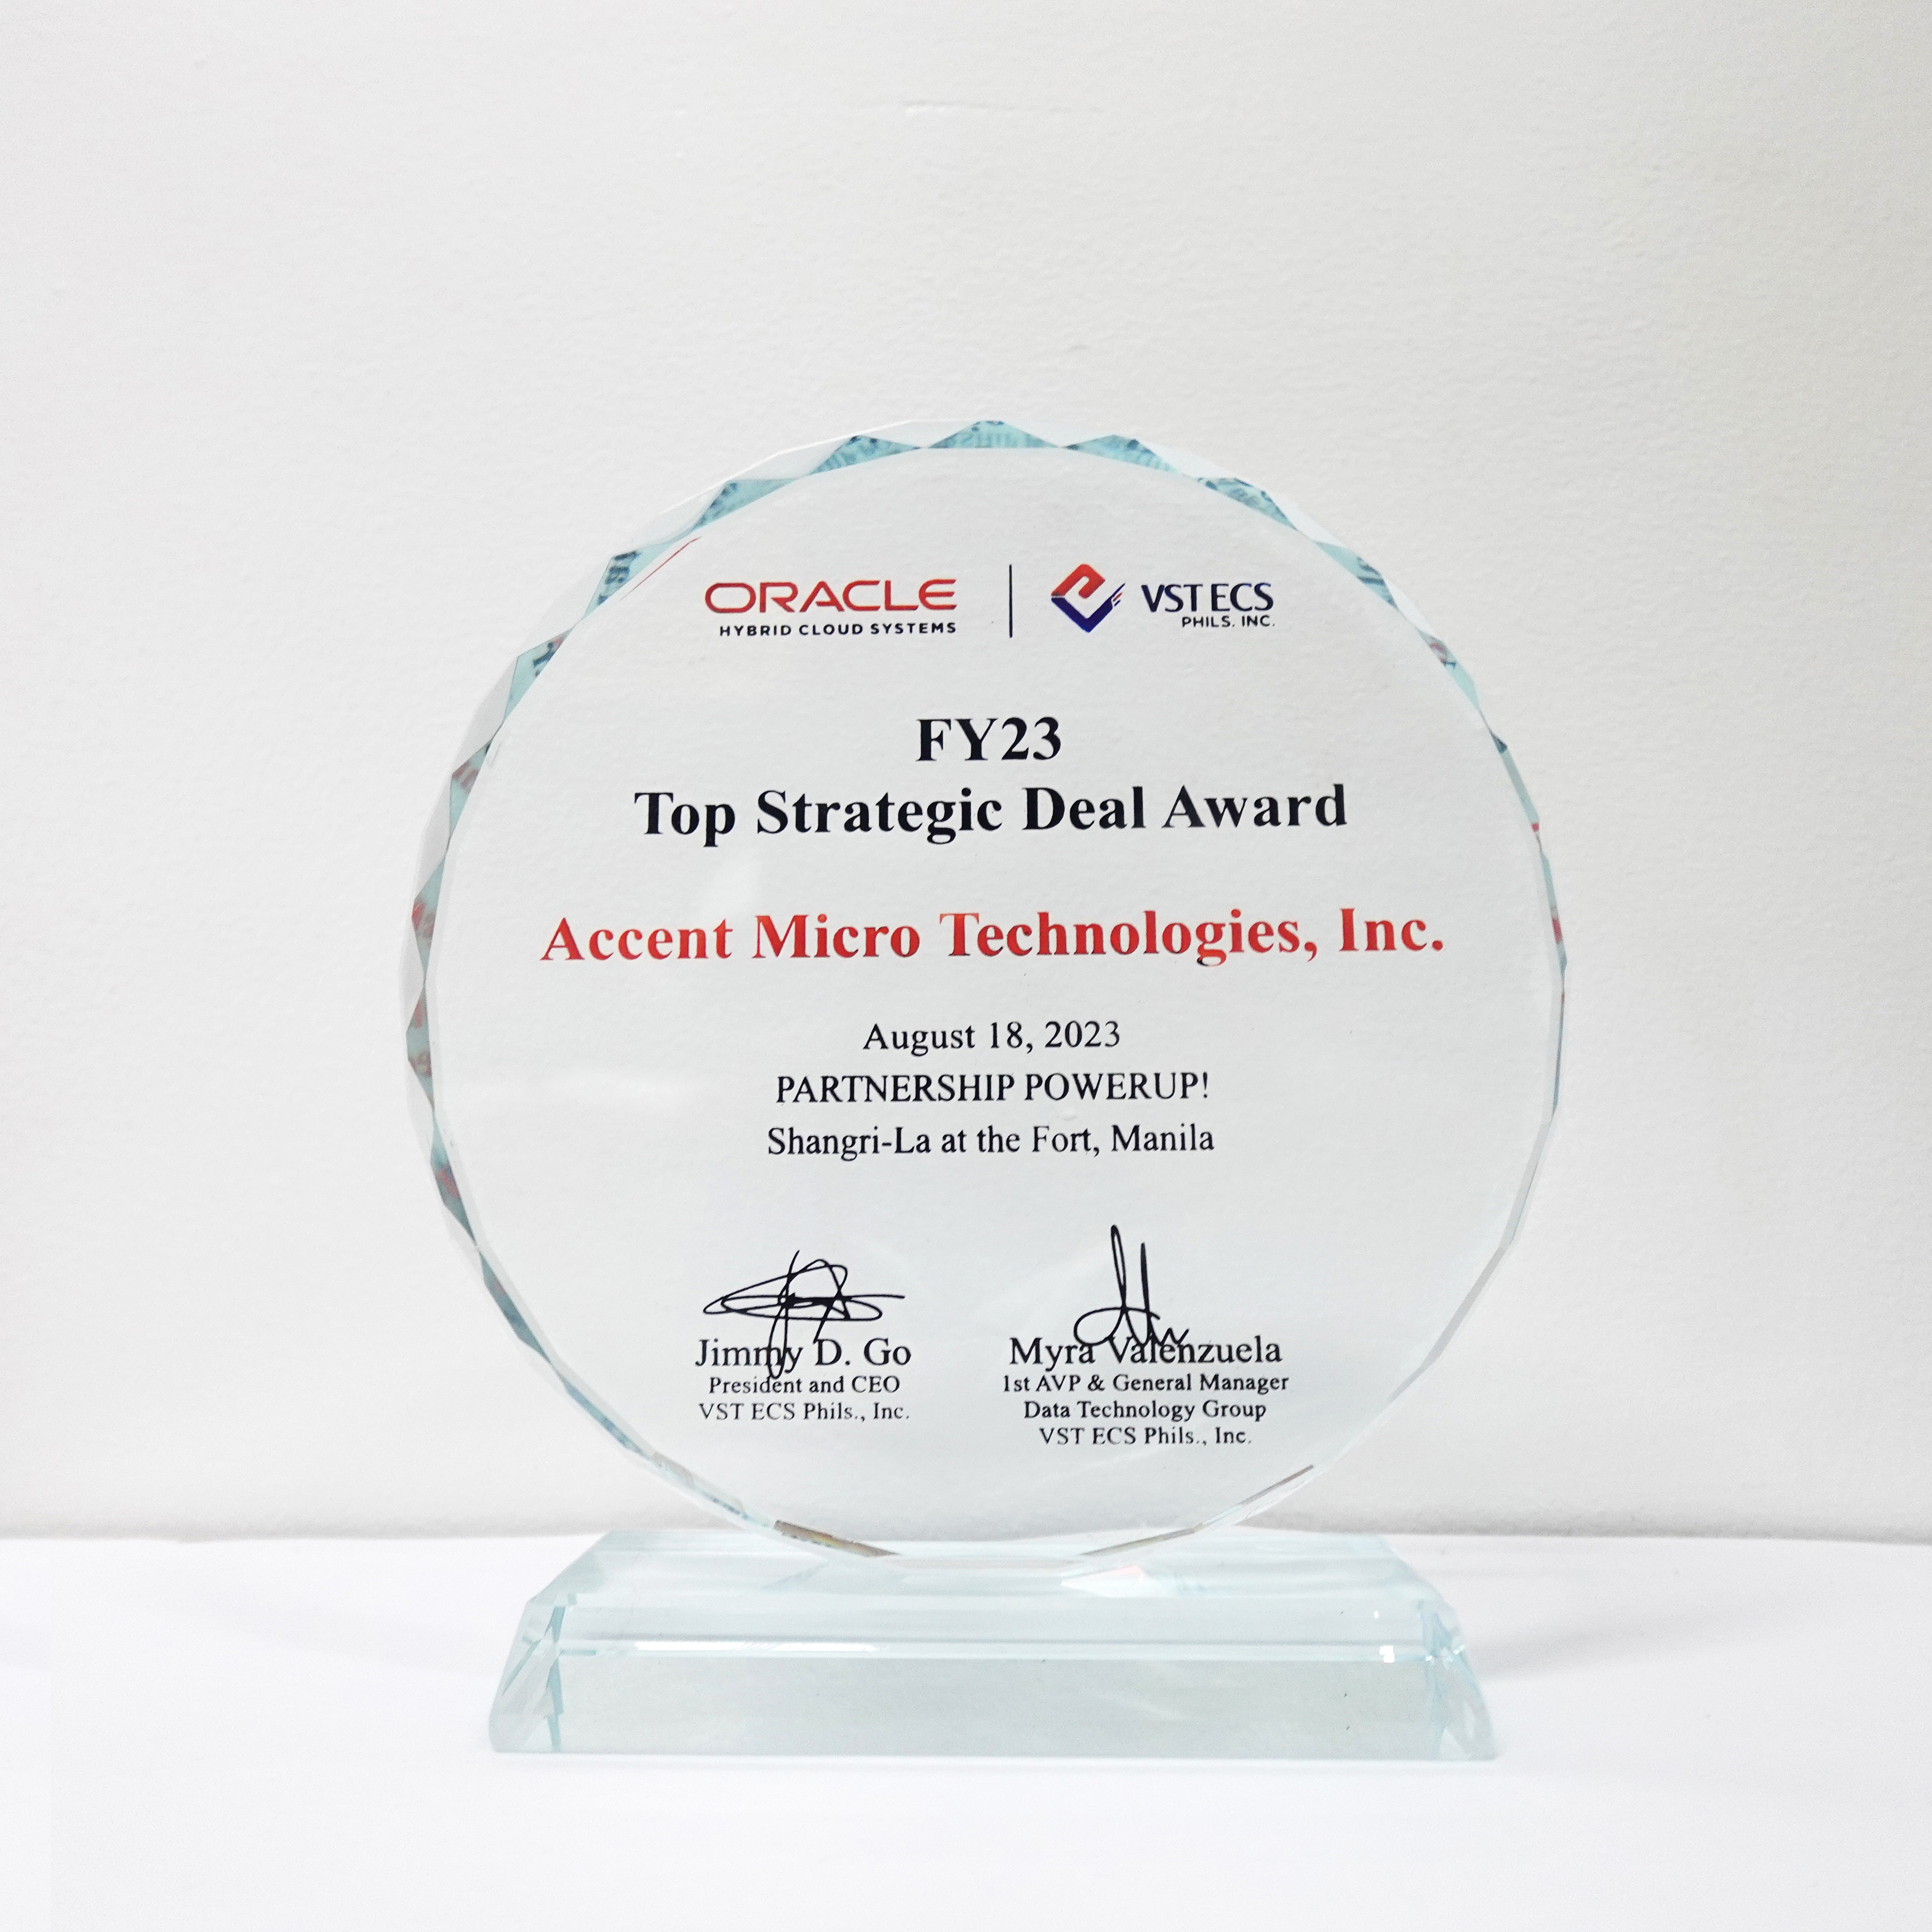 AMTI received the FY22 Top Strategic Deal Award from Oracle and VST-ECS